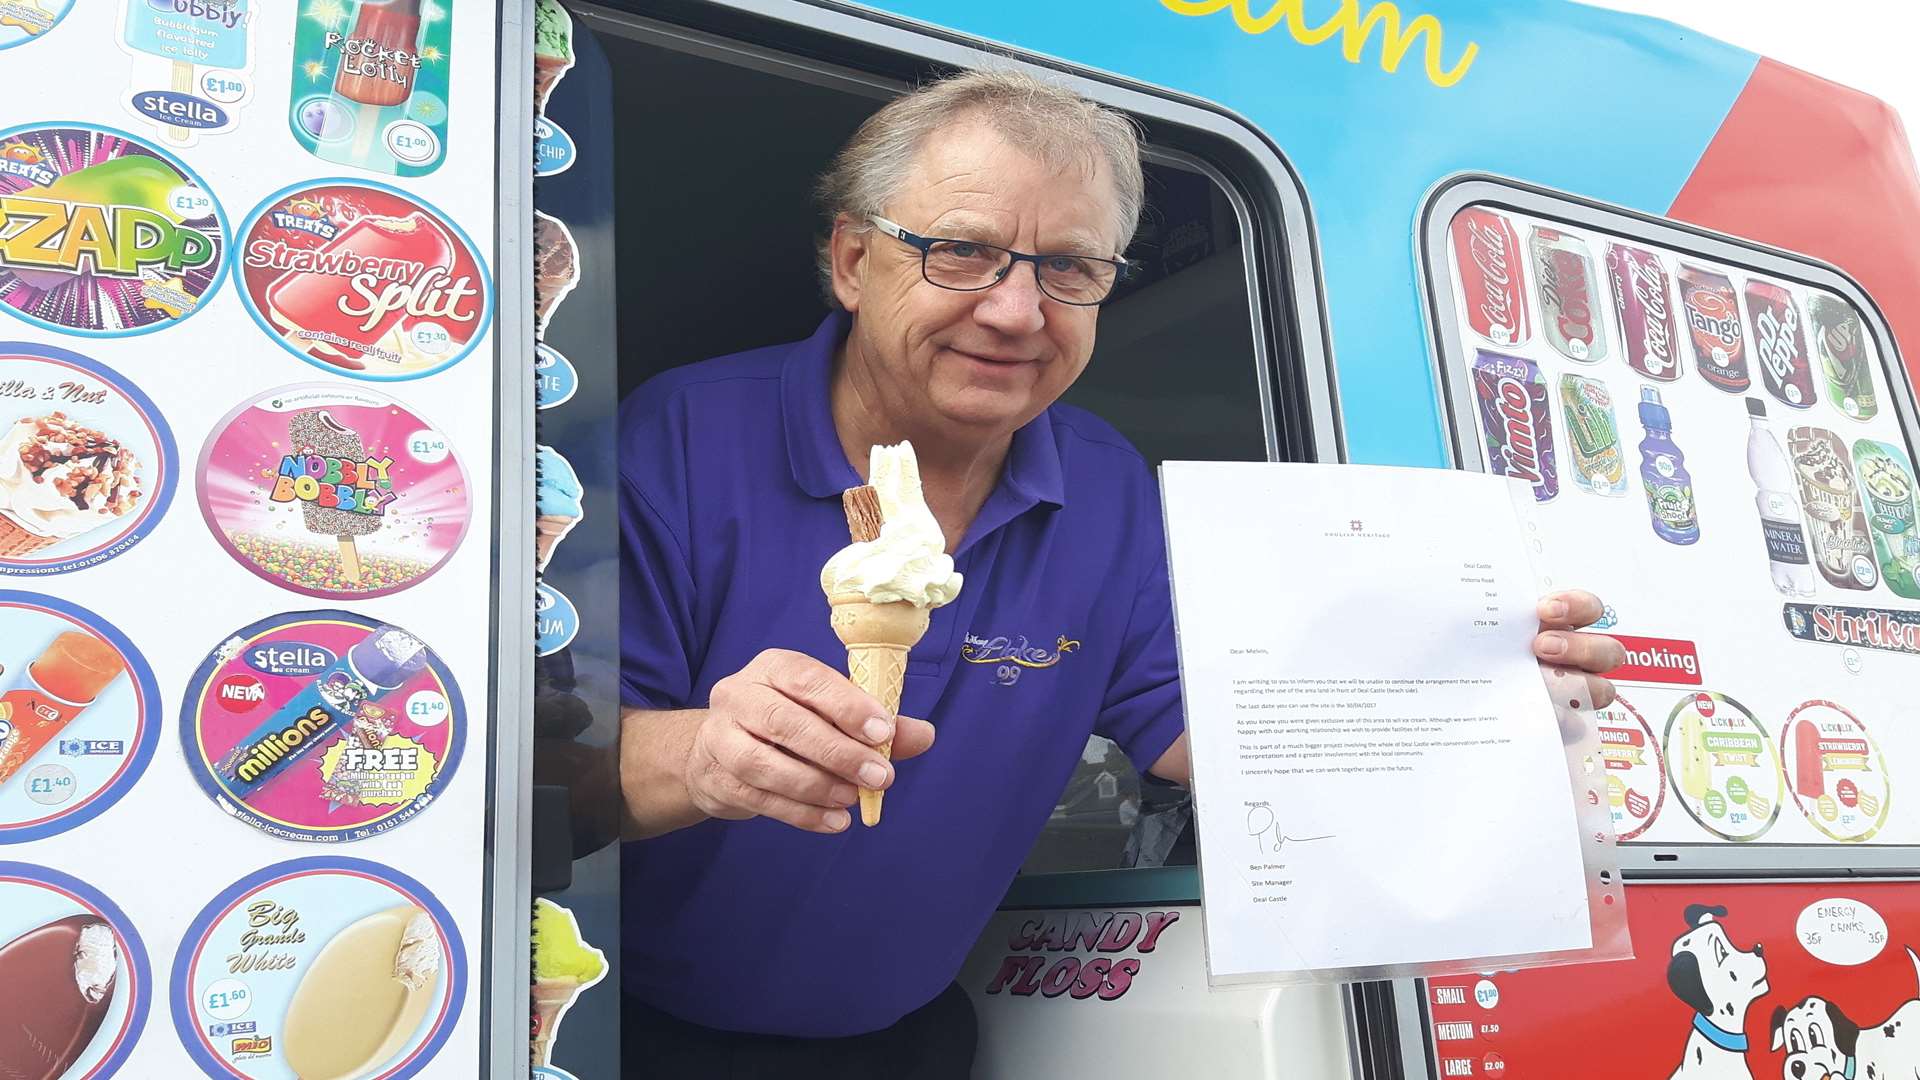 Melvin Nobbs, 62, was issued the notice by English Heritage who want a burger van at the site